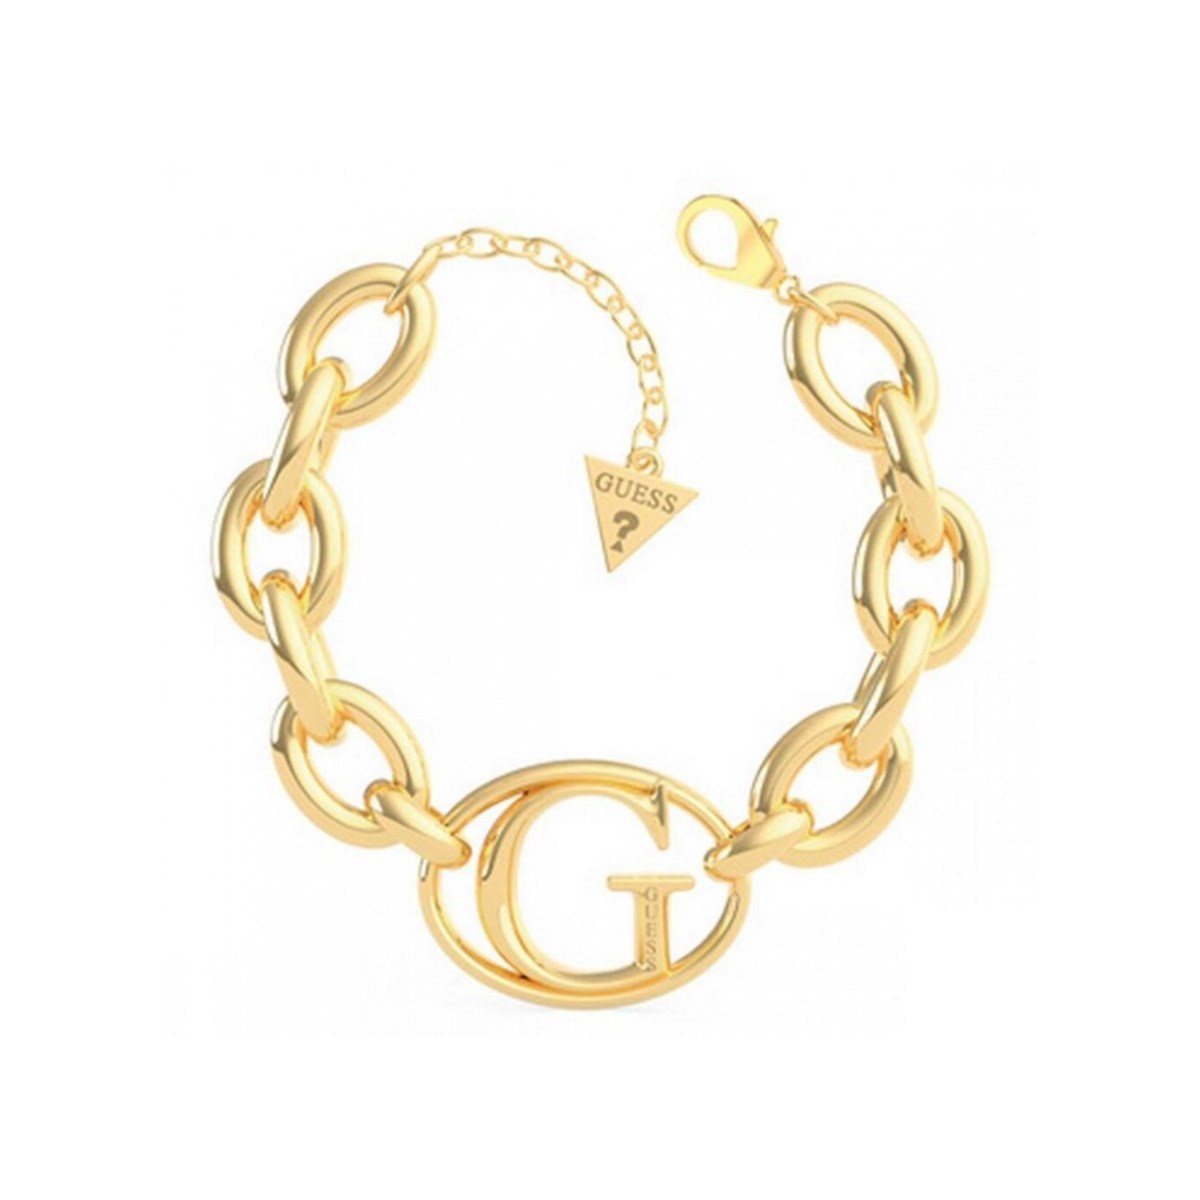 Bracelet Guess - Iconic